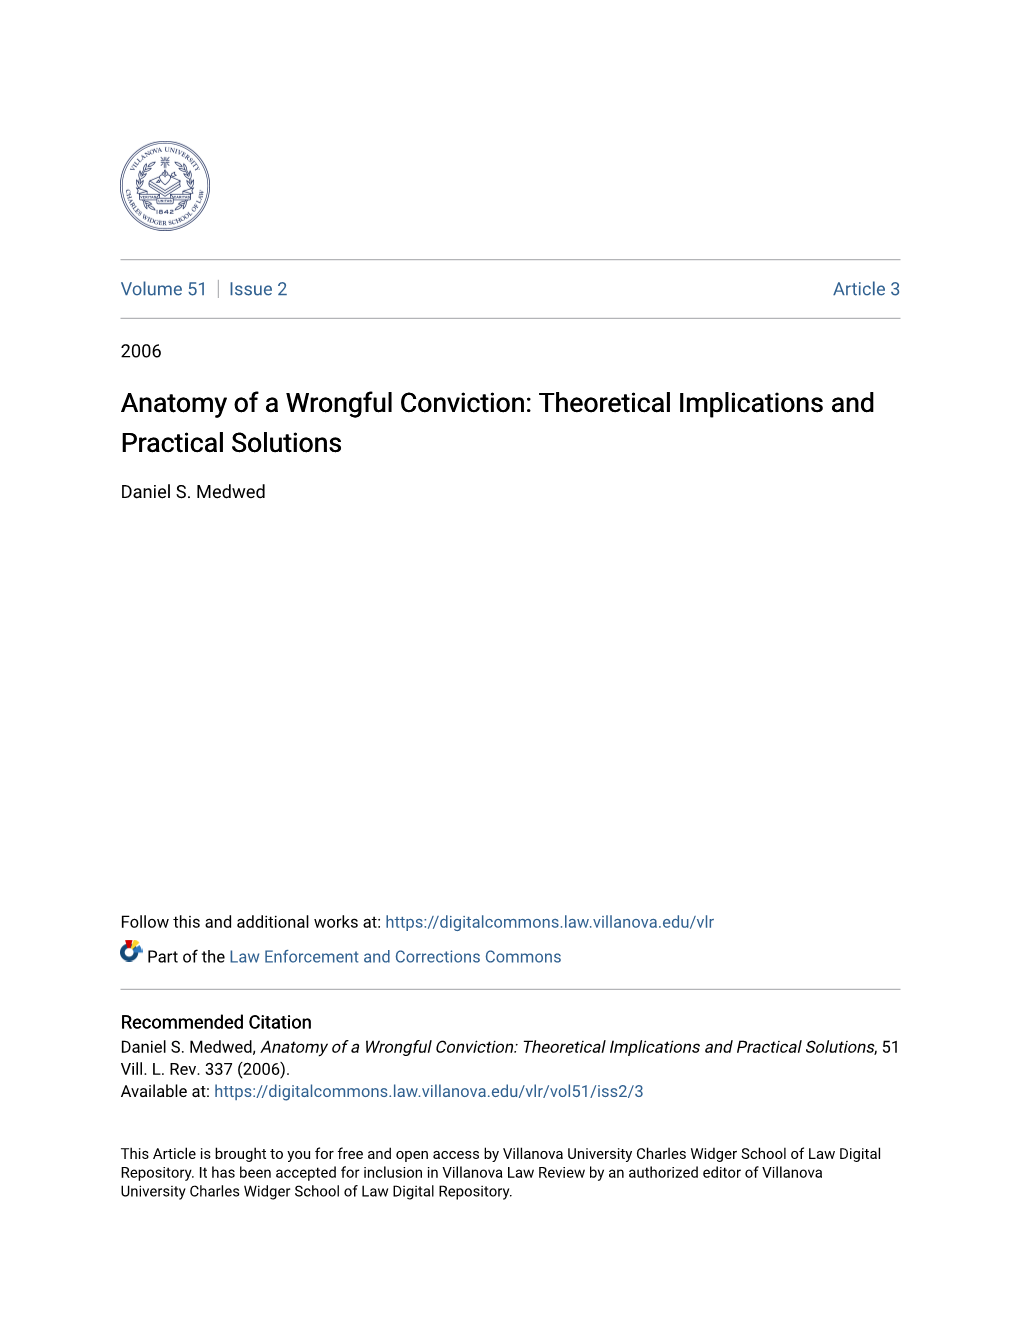 Anatomy of a Wrongful Conviction: Theoretical Implications and Practical Solutions